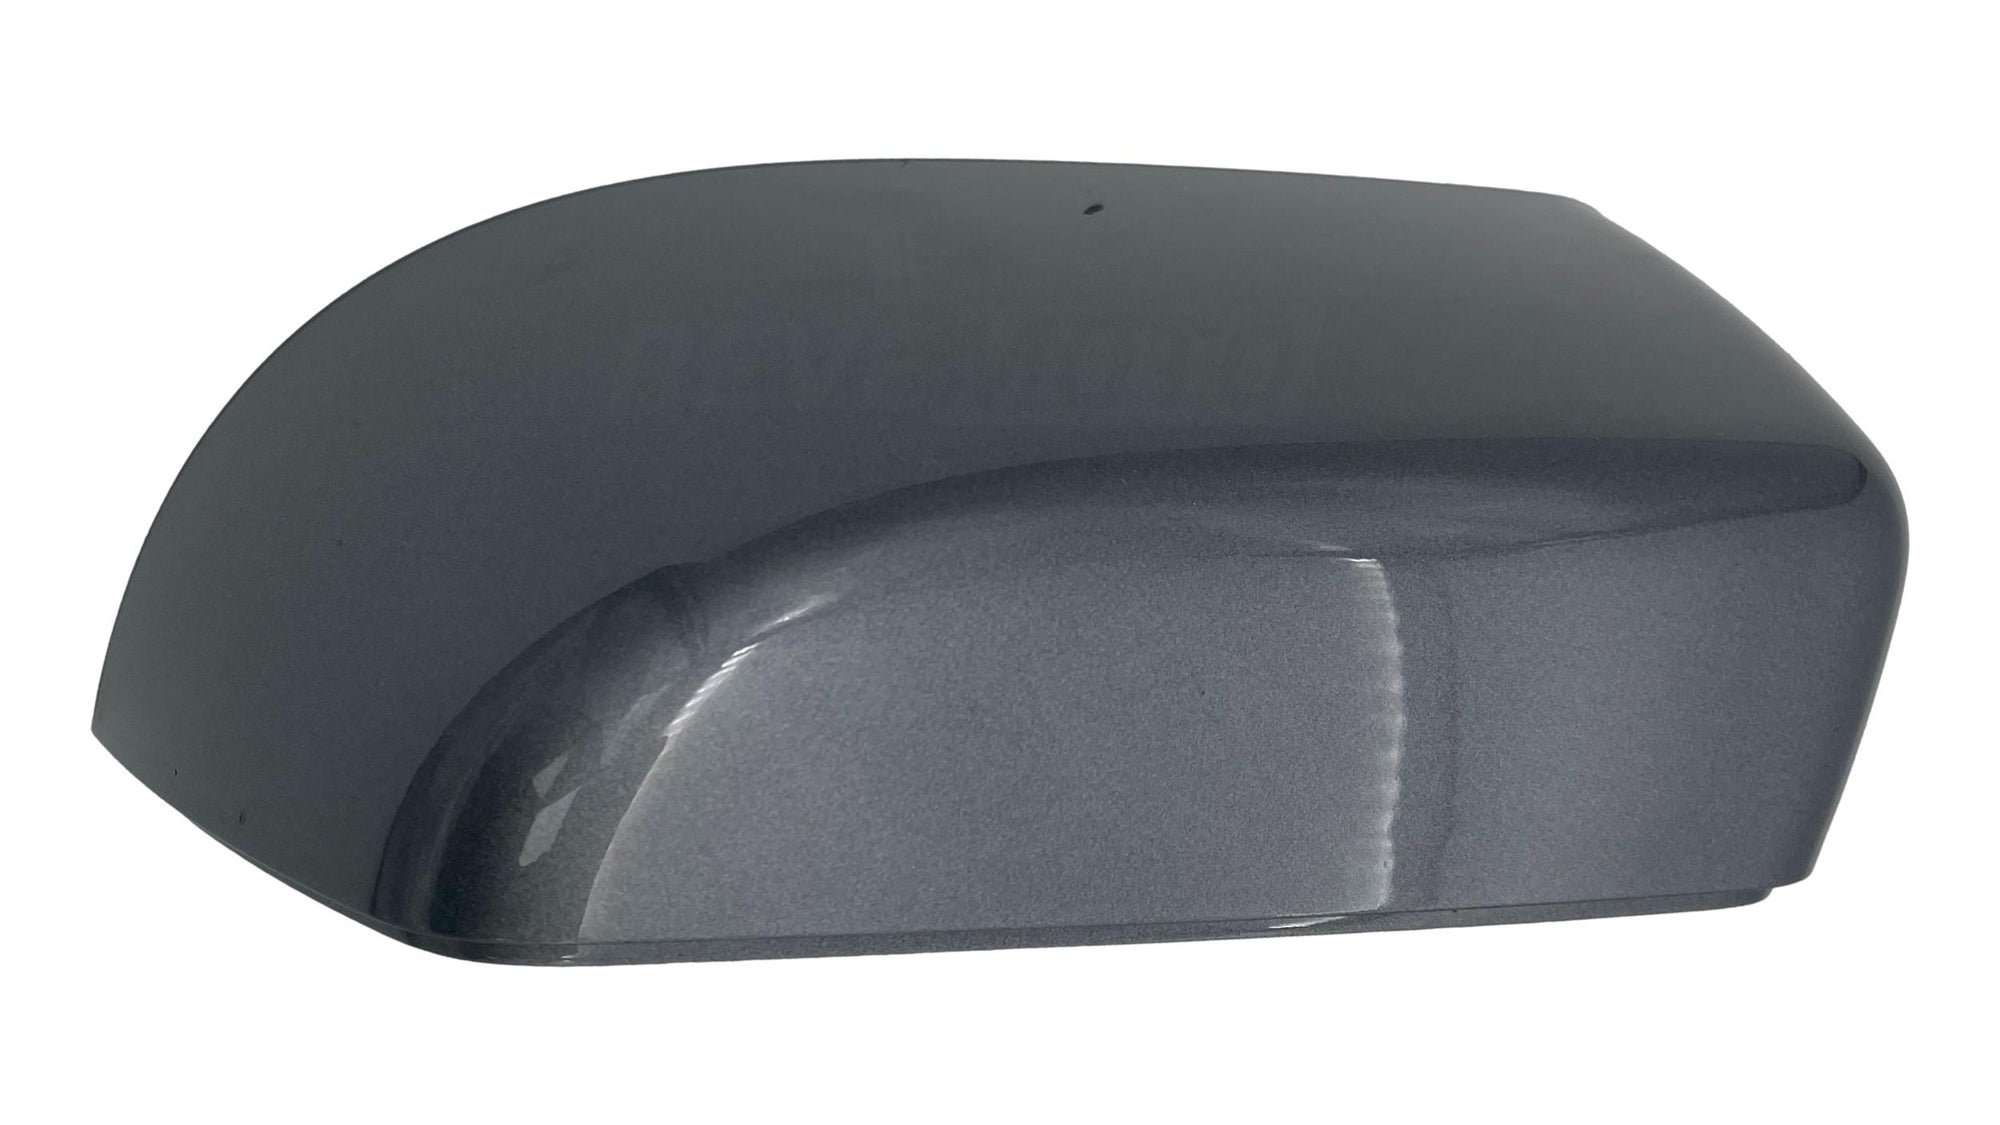 25996 - 2015-2020 Cadillac Escalade Side View Mirror Cover Painted (Driver-Side) Satin Steel Gray Metallic 3 (WA464C) 23463315